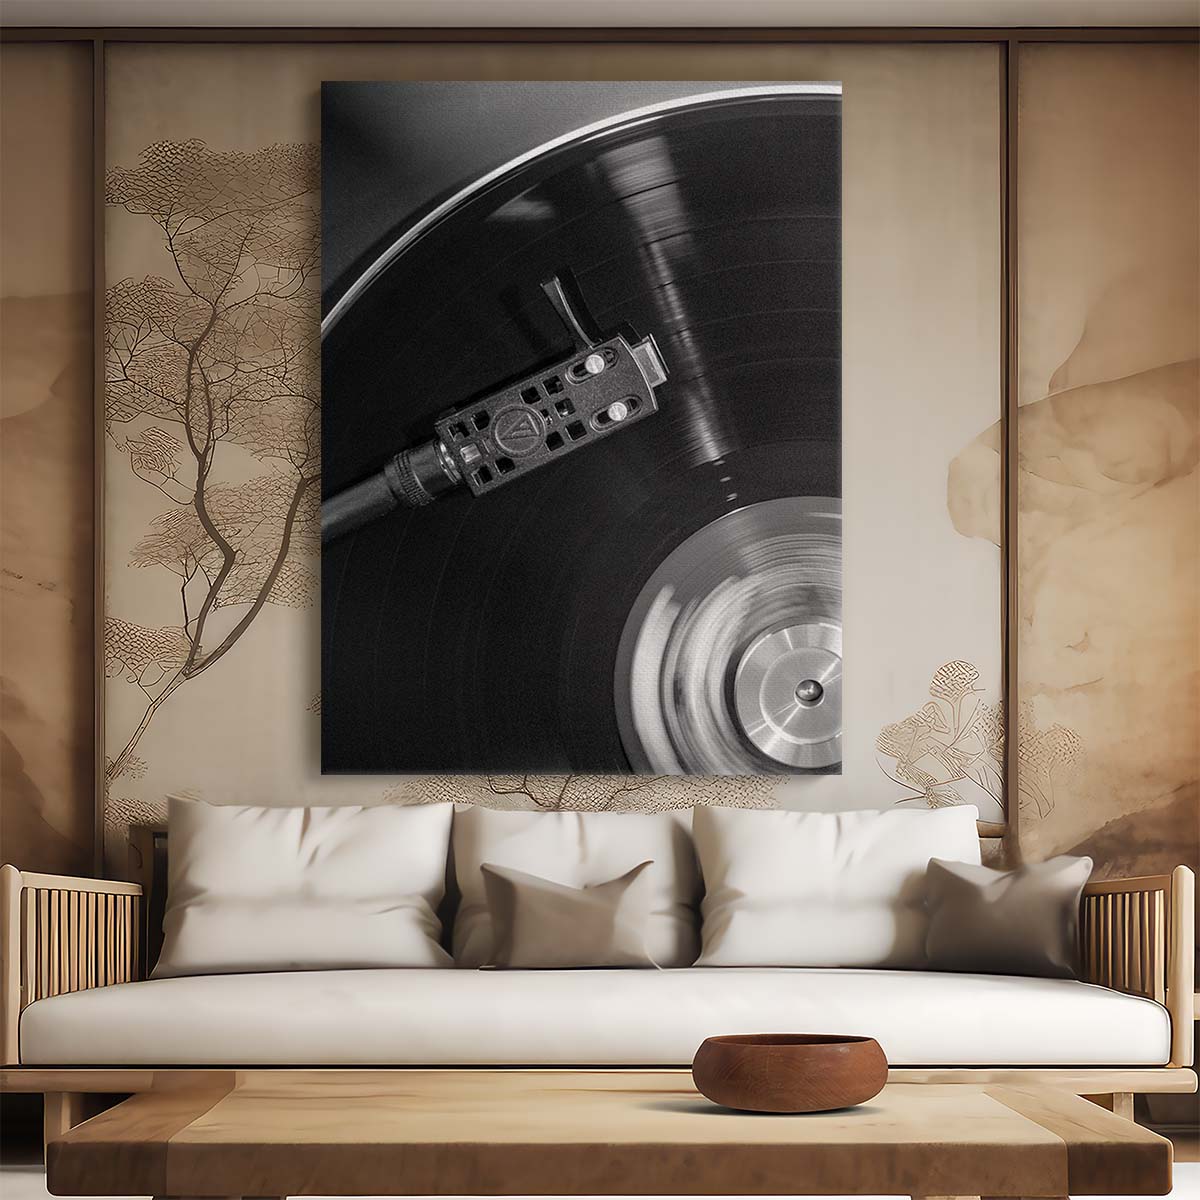 Vintage DJ Vinyl Record Player Photography in Monochrome by Luxuriance Designs, made in USA